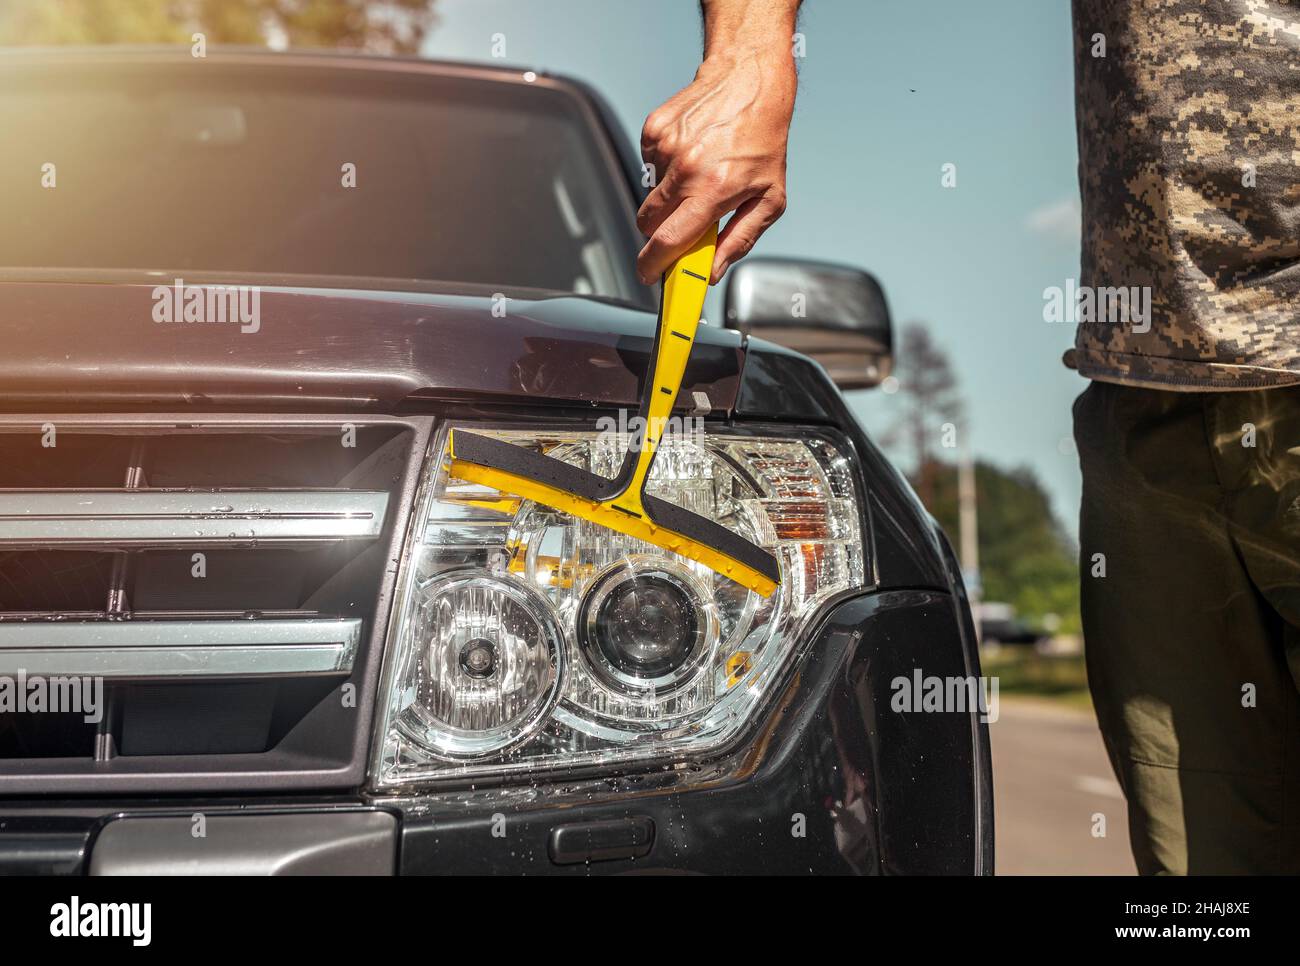 Driver cleaning shiny headlights of new black car, close up. Stock Photo